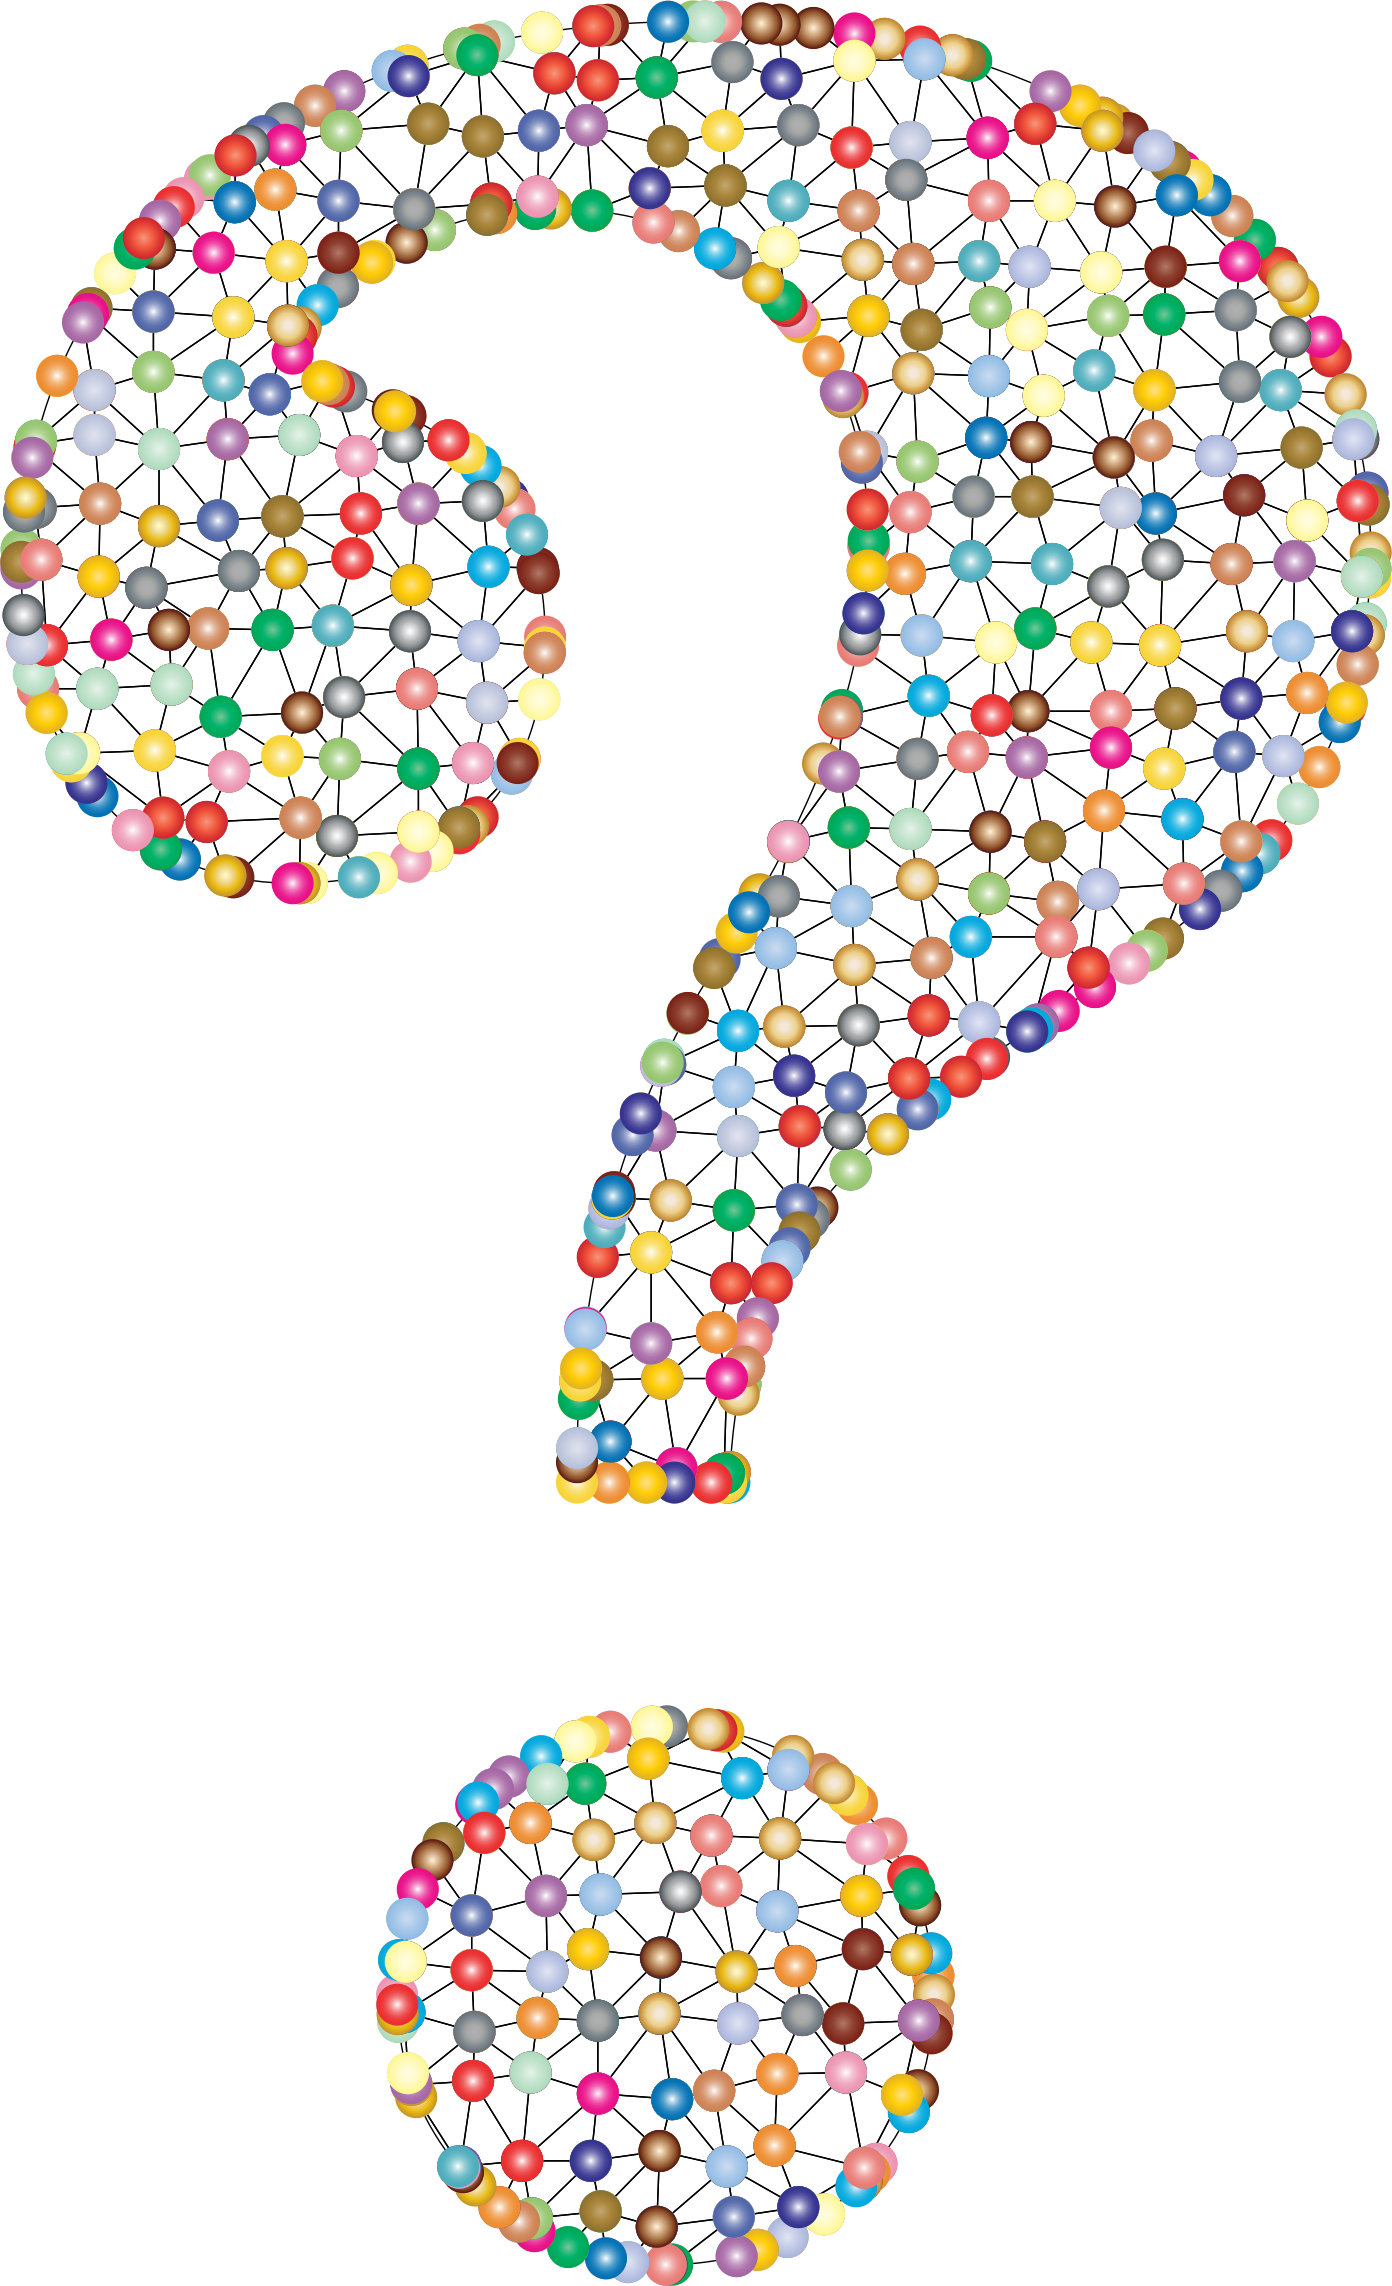 Download Frequently Asked Questions - Question Mark Clipart Transparent PNG  Image with No Background 